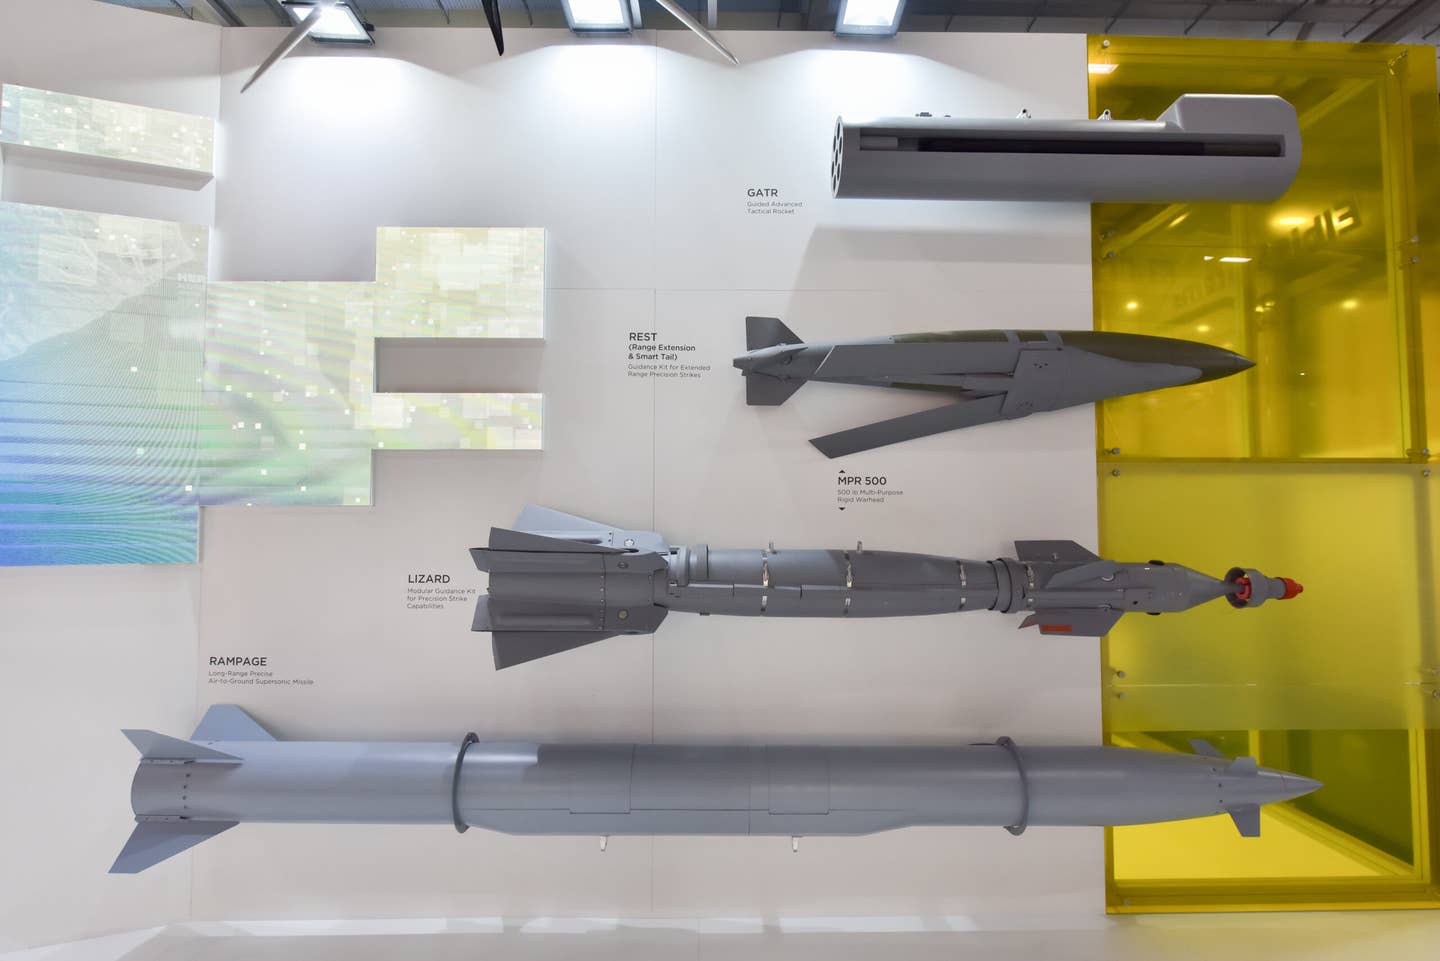 A model of the Rampage missile (bottom) displayed during the Farnborough International Airshow in England in July 2022. Arranged above it are the Guided Advanced Tactical Rocket (GATR), Range Extension and Smart Tail (REST) kit, and the Lizard precision-guided bomb. <em>Photo by John Keeble/Getty Images</em>